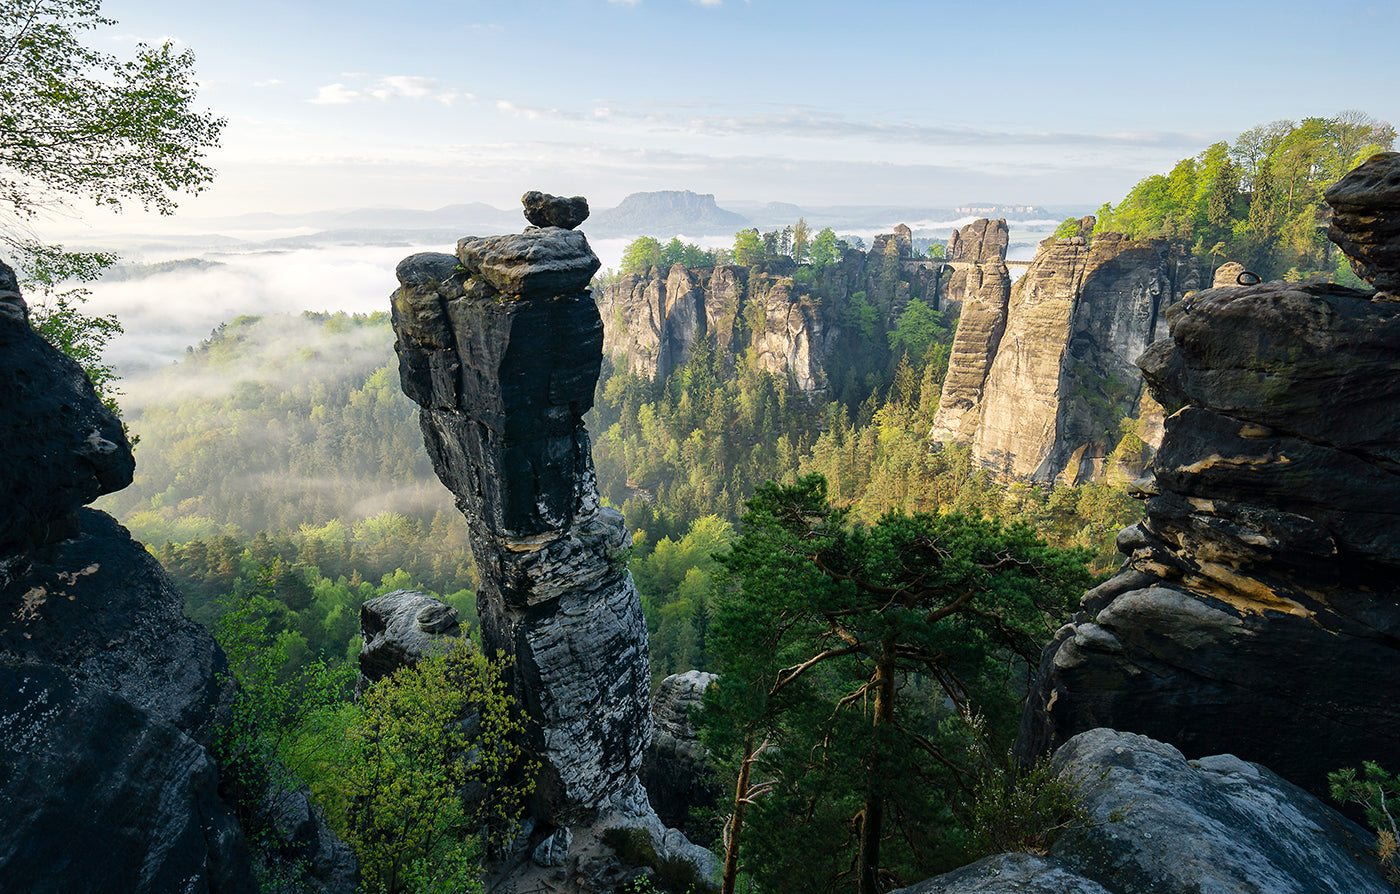 Sandstone mountains along the Malerweg in the eastern part of German in Saxony province. (Photo: Philipp Zieger)